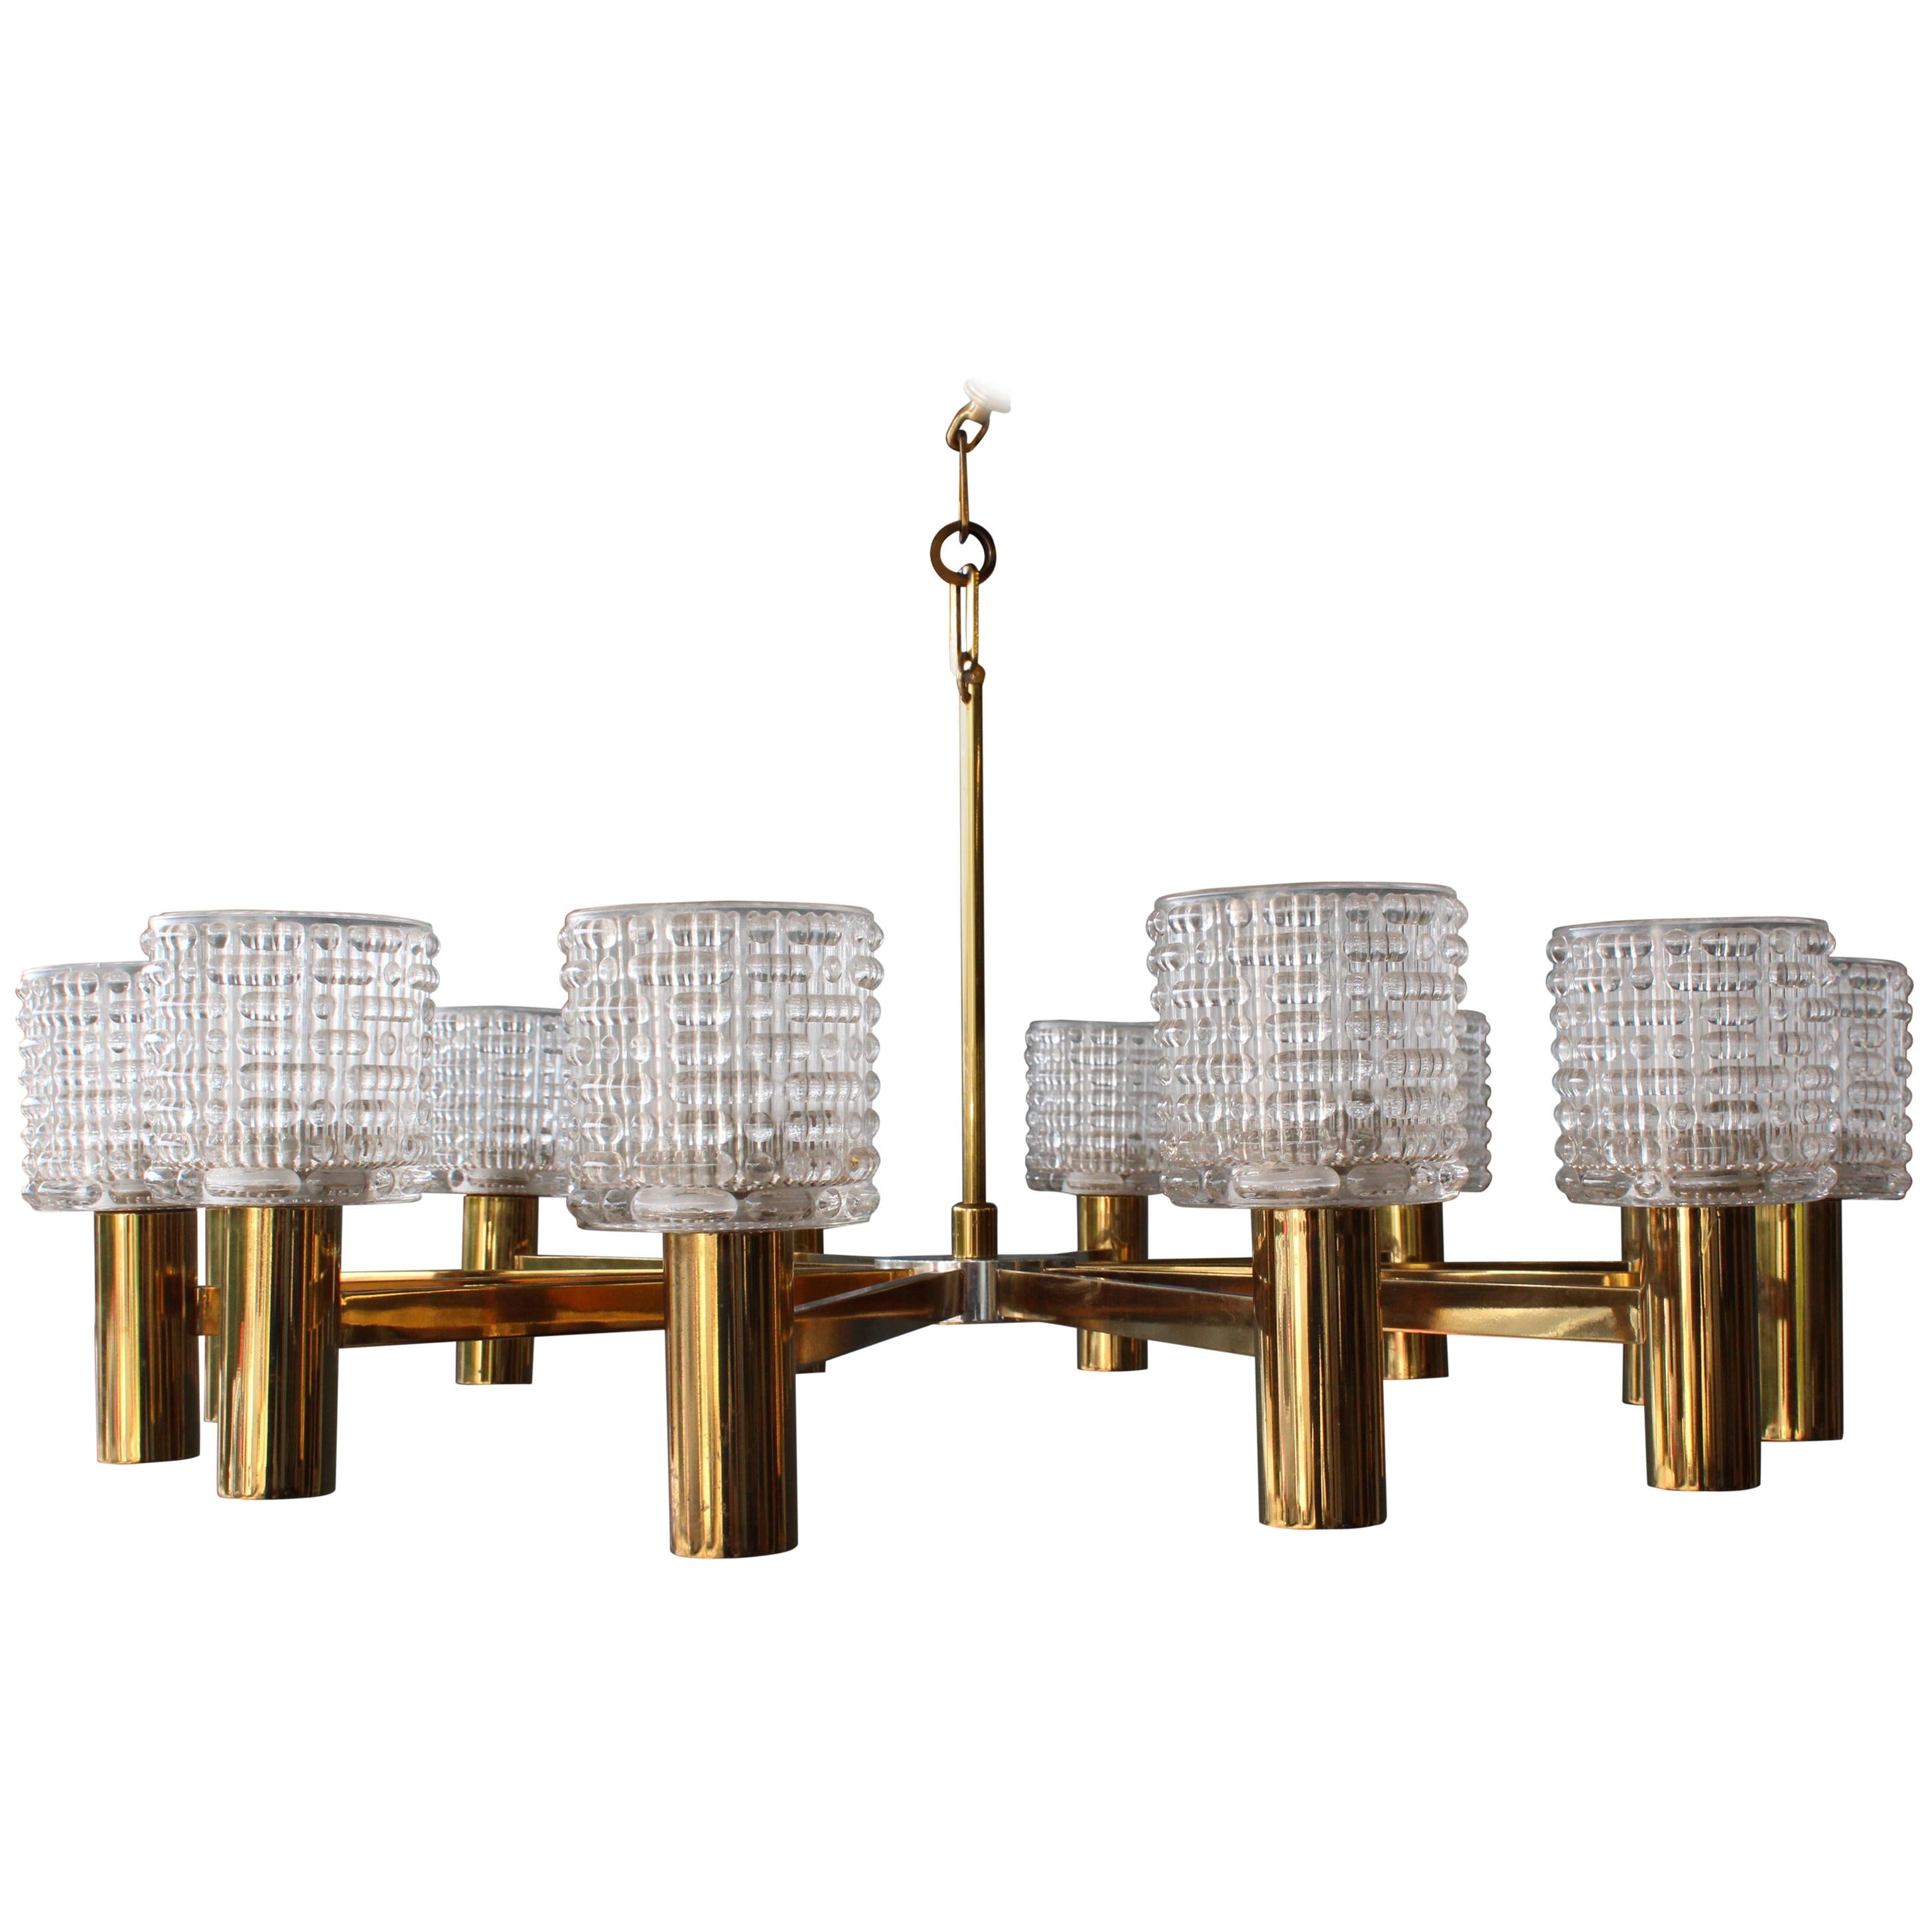 1960s Italian Chandelier with Cut Crystal Shades by Arredoluce Monza